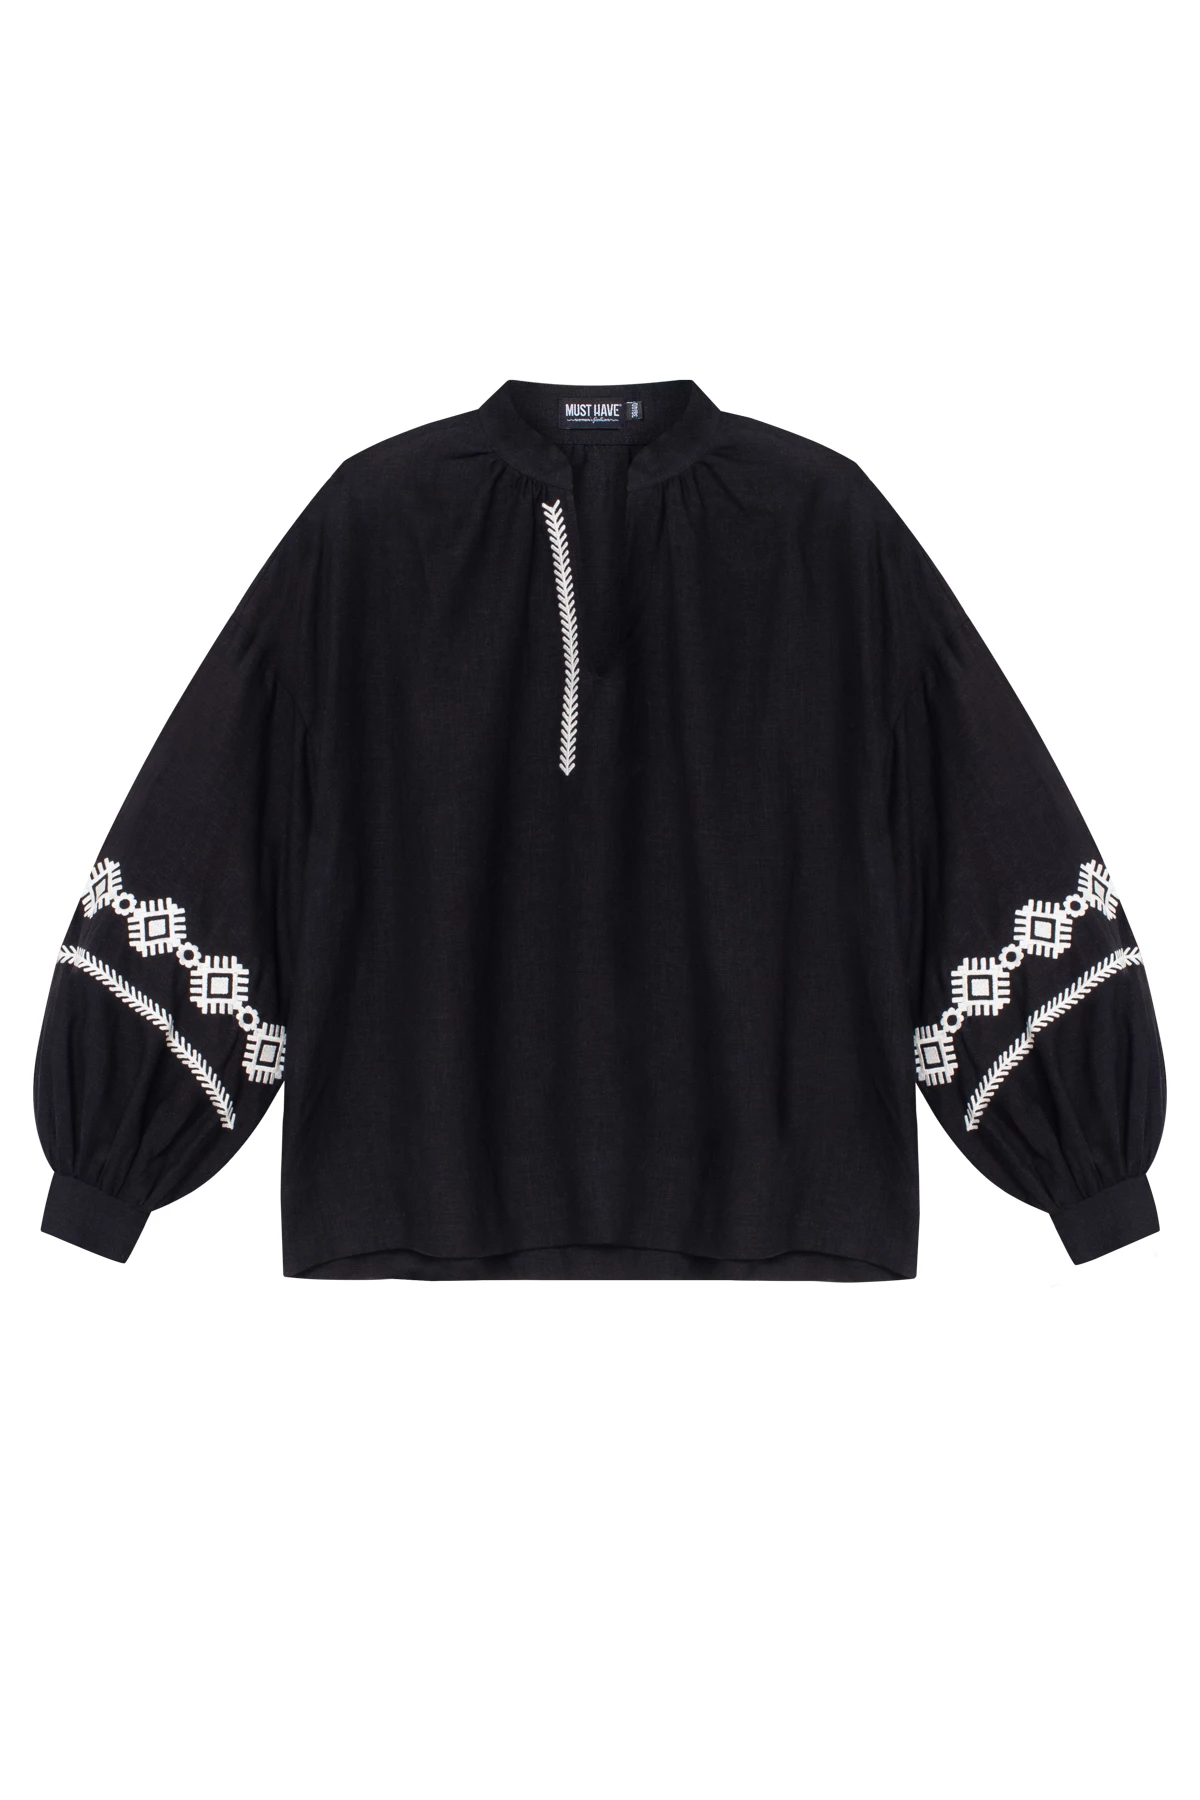 Black linen vyshyvanka shirt with floral embroidery, photo 7